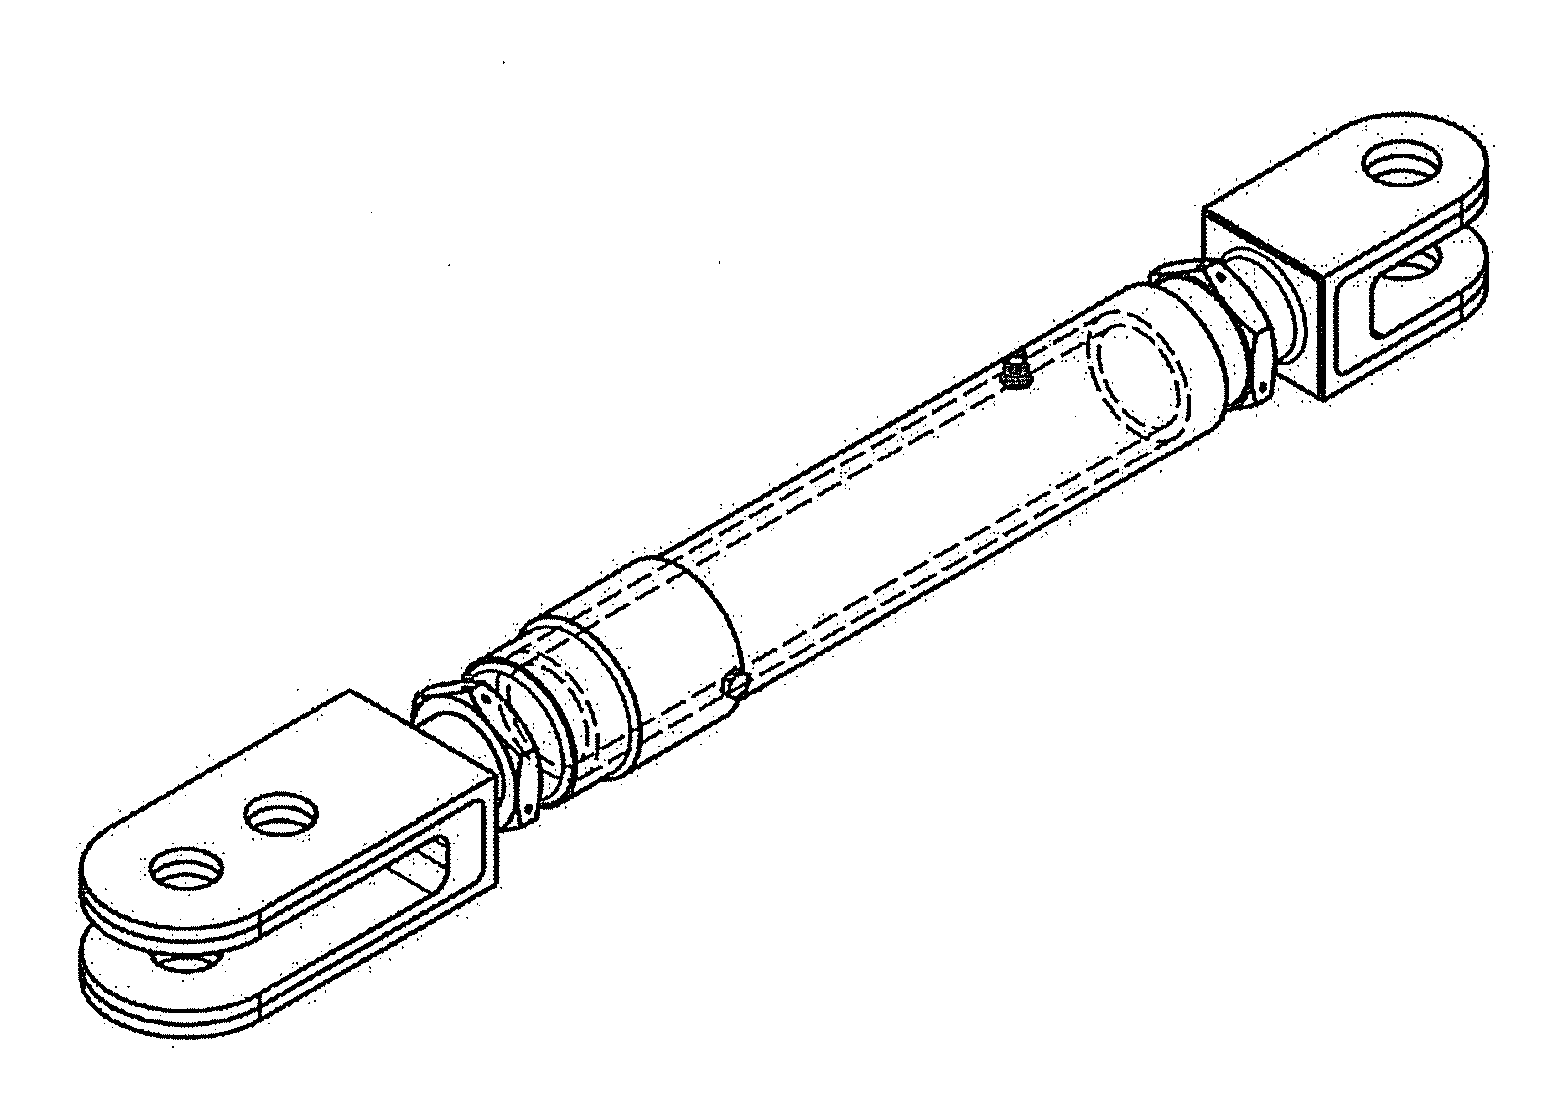 Composite rod, manufacturing method and tool